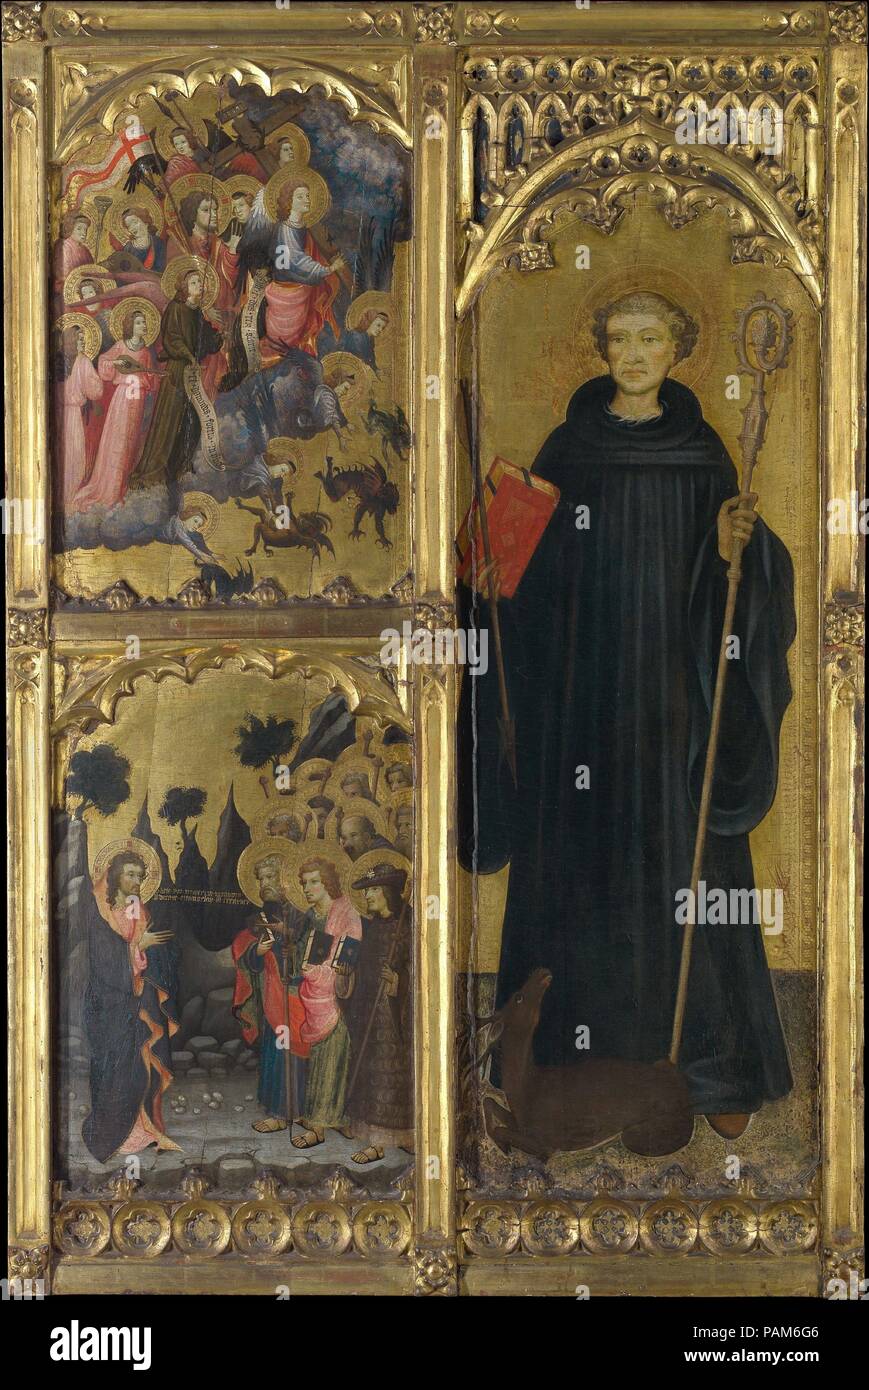 Saint Giles with Christ Triumphant over Satan and the Mission of the Apostles. Artist: Miguel Alcañiz (or Miquel Alcanyís) (Spanish, Valencian, active by 1408-died after 1447). Dimensions: Overall 59 5/8 x 39 1/2 in. (151.4 x 100.3 cm); upper left panel, painted surface 24 1/8 x 16 7/8 in. (61.3 x 42.9 cm); lower left panel, painted surface 24 5/8 x 16 7/8 in. (62.5 x 42.9 cm); right panel, painted surface 46 1/8 x 16 7/8 in. (117.2 x 42.9 cm). Date: ca. 1408.  These panels, from an altarpiece for the Valencian church of San Juan del Hospital, are among the earliest works of Miguel Alcañiz, an Stock Photo